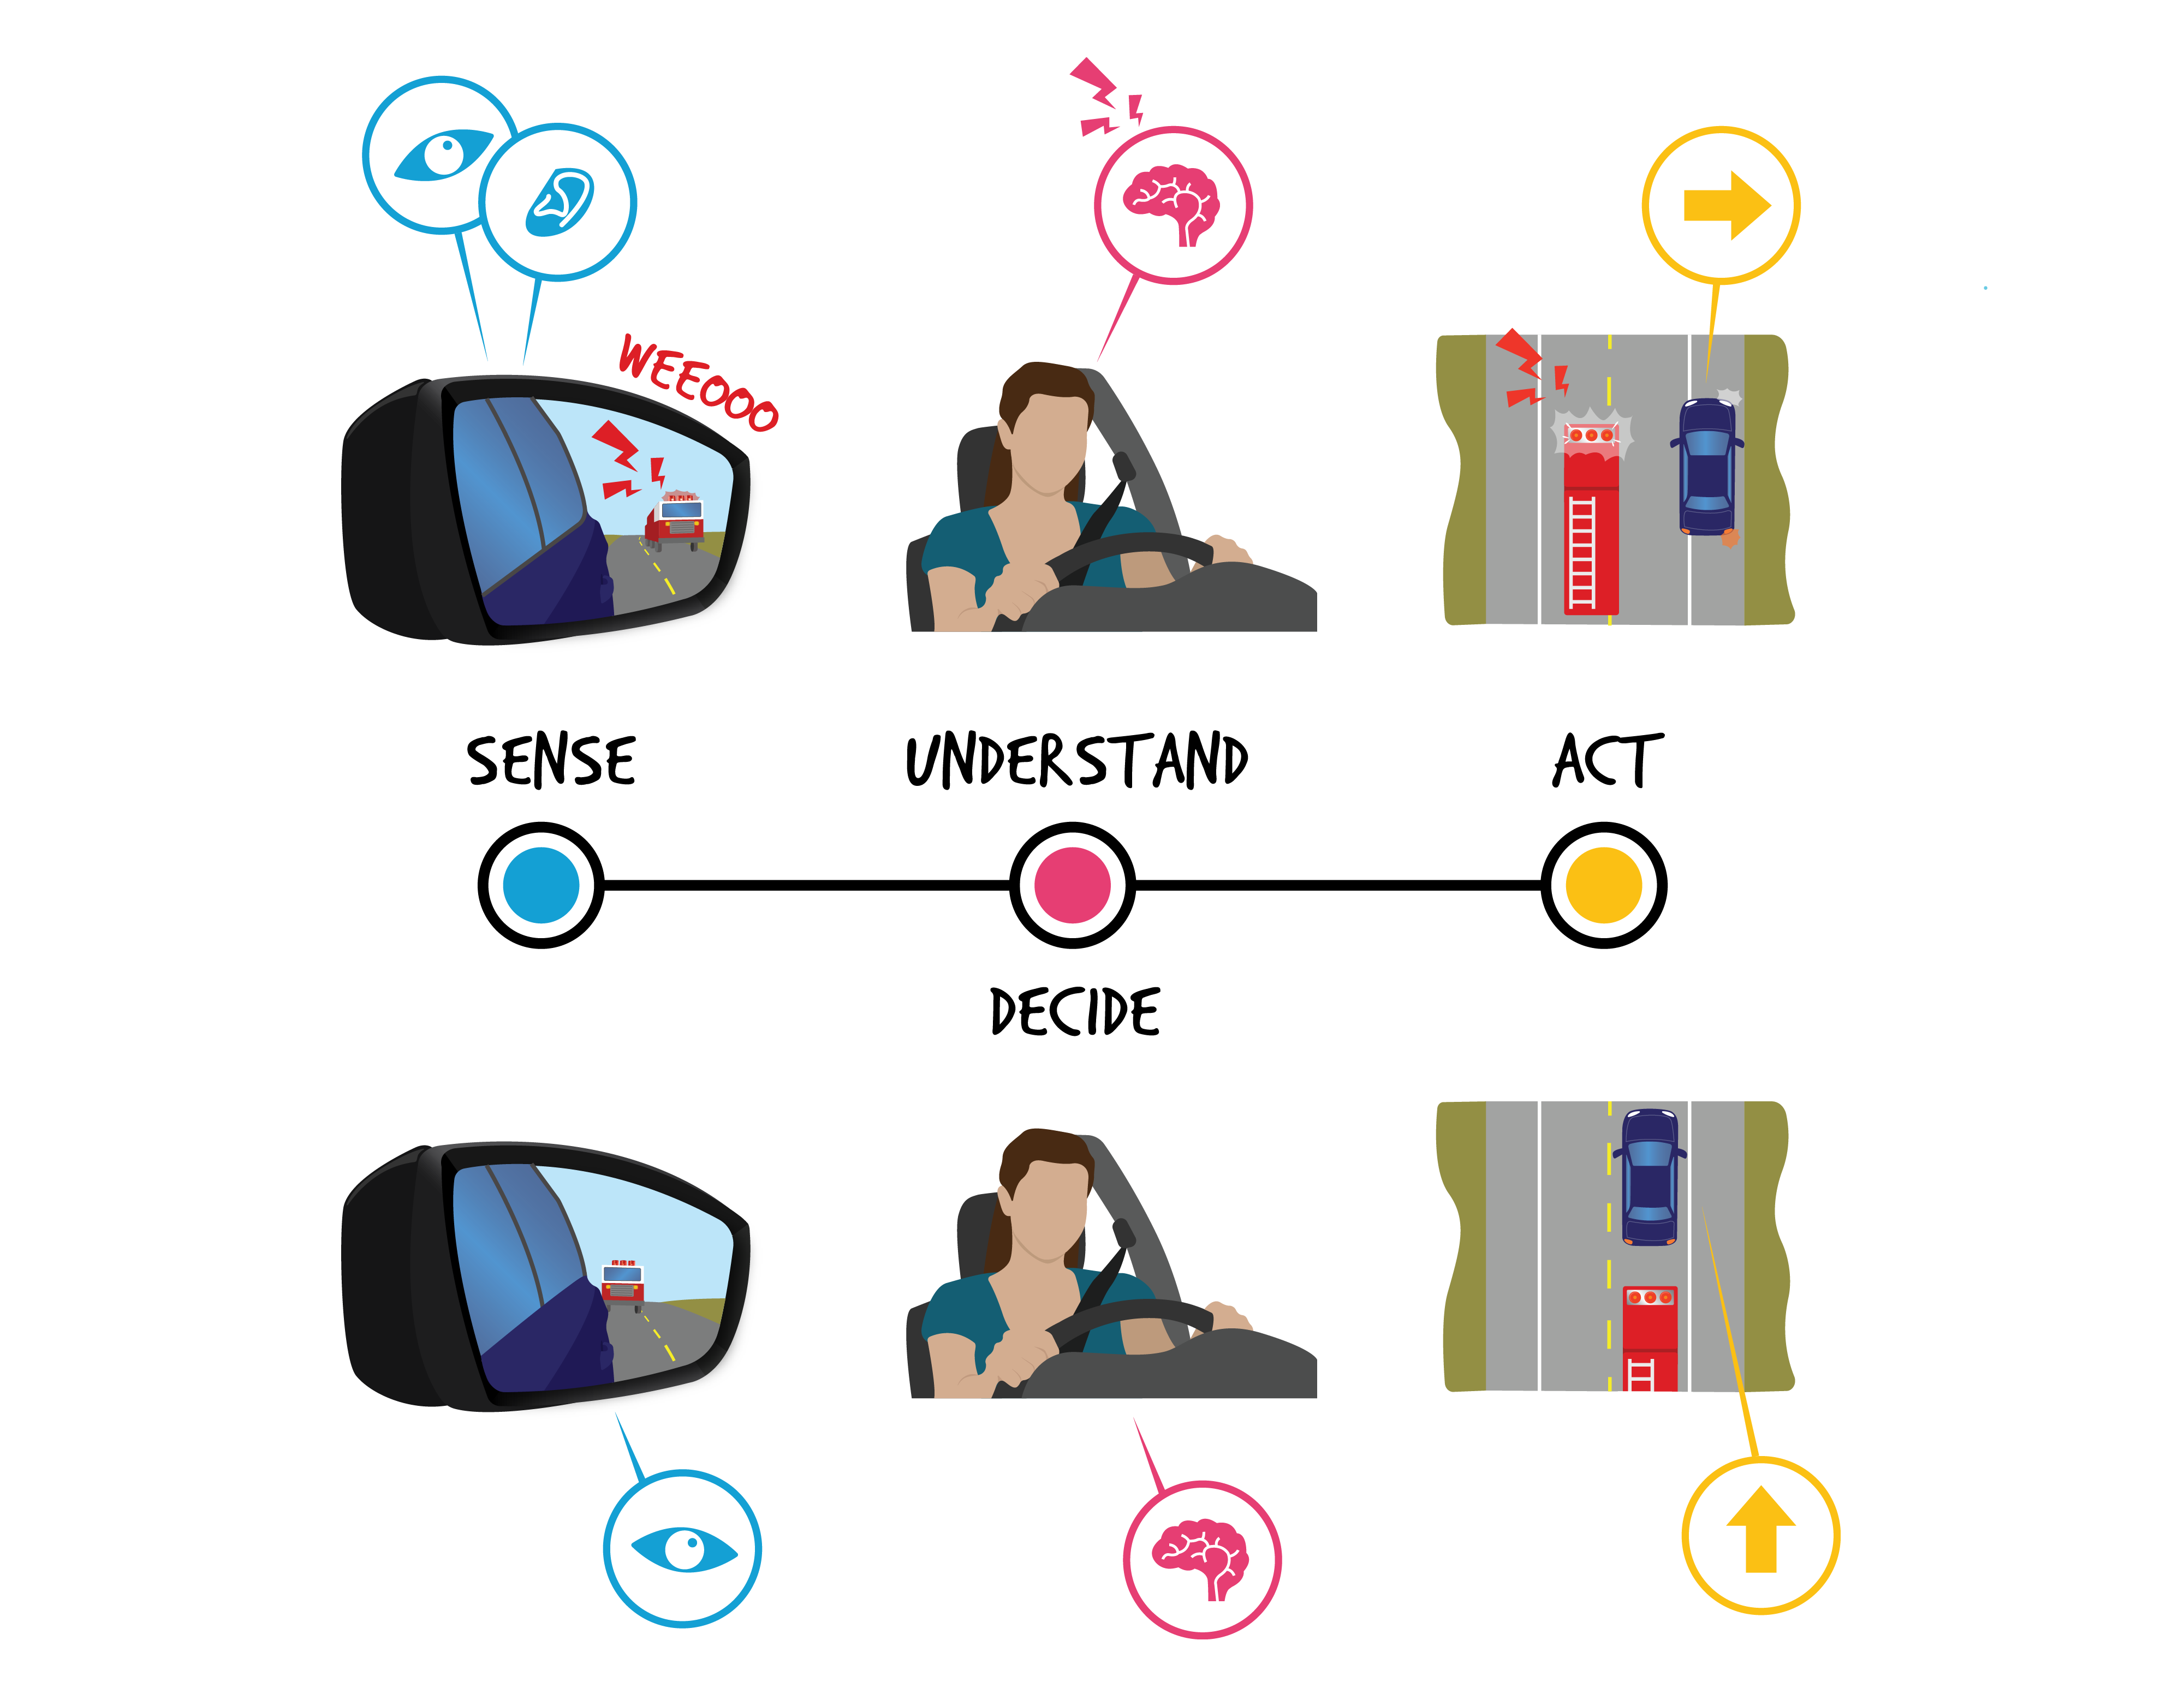 Car side mirror where a firetruck can be seen. 3 red electric symbols coming out of truck. Above mirror in red text is WEEOO, and 2 blue circles pointing to the mirror. The one on the left has an eye symbol, and the one on the right has an ear. Beside is a person driving a car. There is a pink circle with a brain inside pointing to the person. 3 pink electric symbols are above the circle. Above view of a street. In the left lane is a firetruck with 3 red electric symbols coming out. On the right lane, and slightly pulled over is a blue car with a yellow circle pointing to it. There is a yellow arrow pointing right inside. Below the images is a line with 3 circles. On the left end is a blue circle with the word Sense, in the middle is a pink circle with the words Understand and Decide, and on the right end is a yellow circle with the word Act. Under the line, the 3 images are repeated with slight changes. The firetruck can be seen in the mirror, but it is following behind and doesn&#039;t have sirens on. There is only the circle with the eye. The image of the person driving is the same, minus the electric symbols coming out of the circle. The final image the firetruck is following behind the blue care. And the circle from the car has an arrow pointing straight.